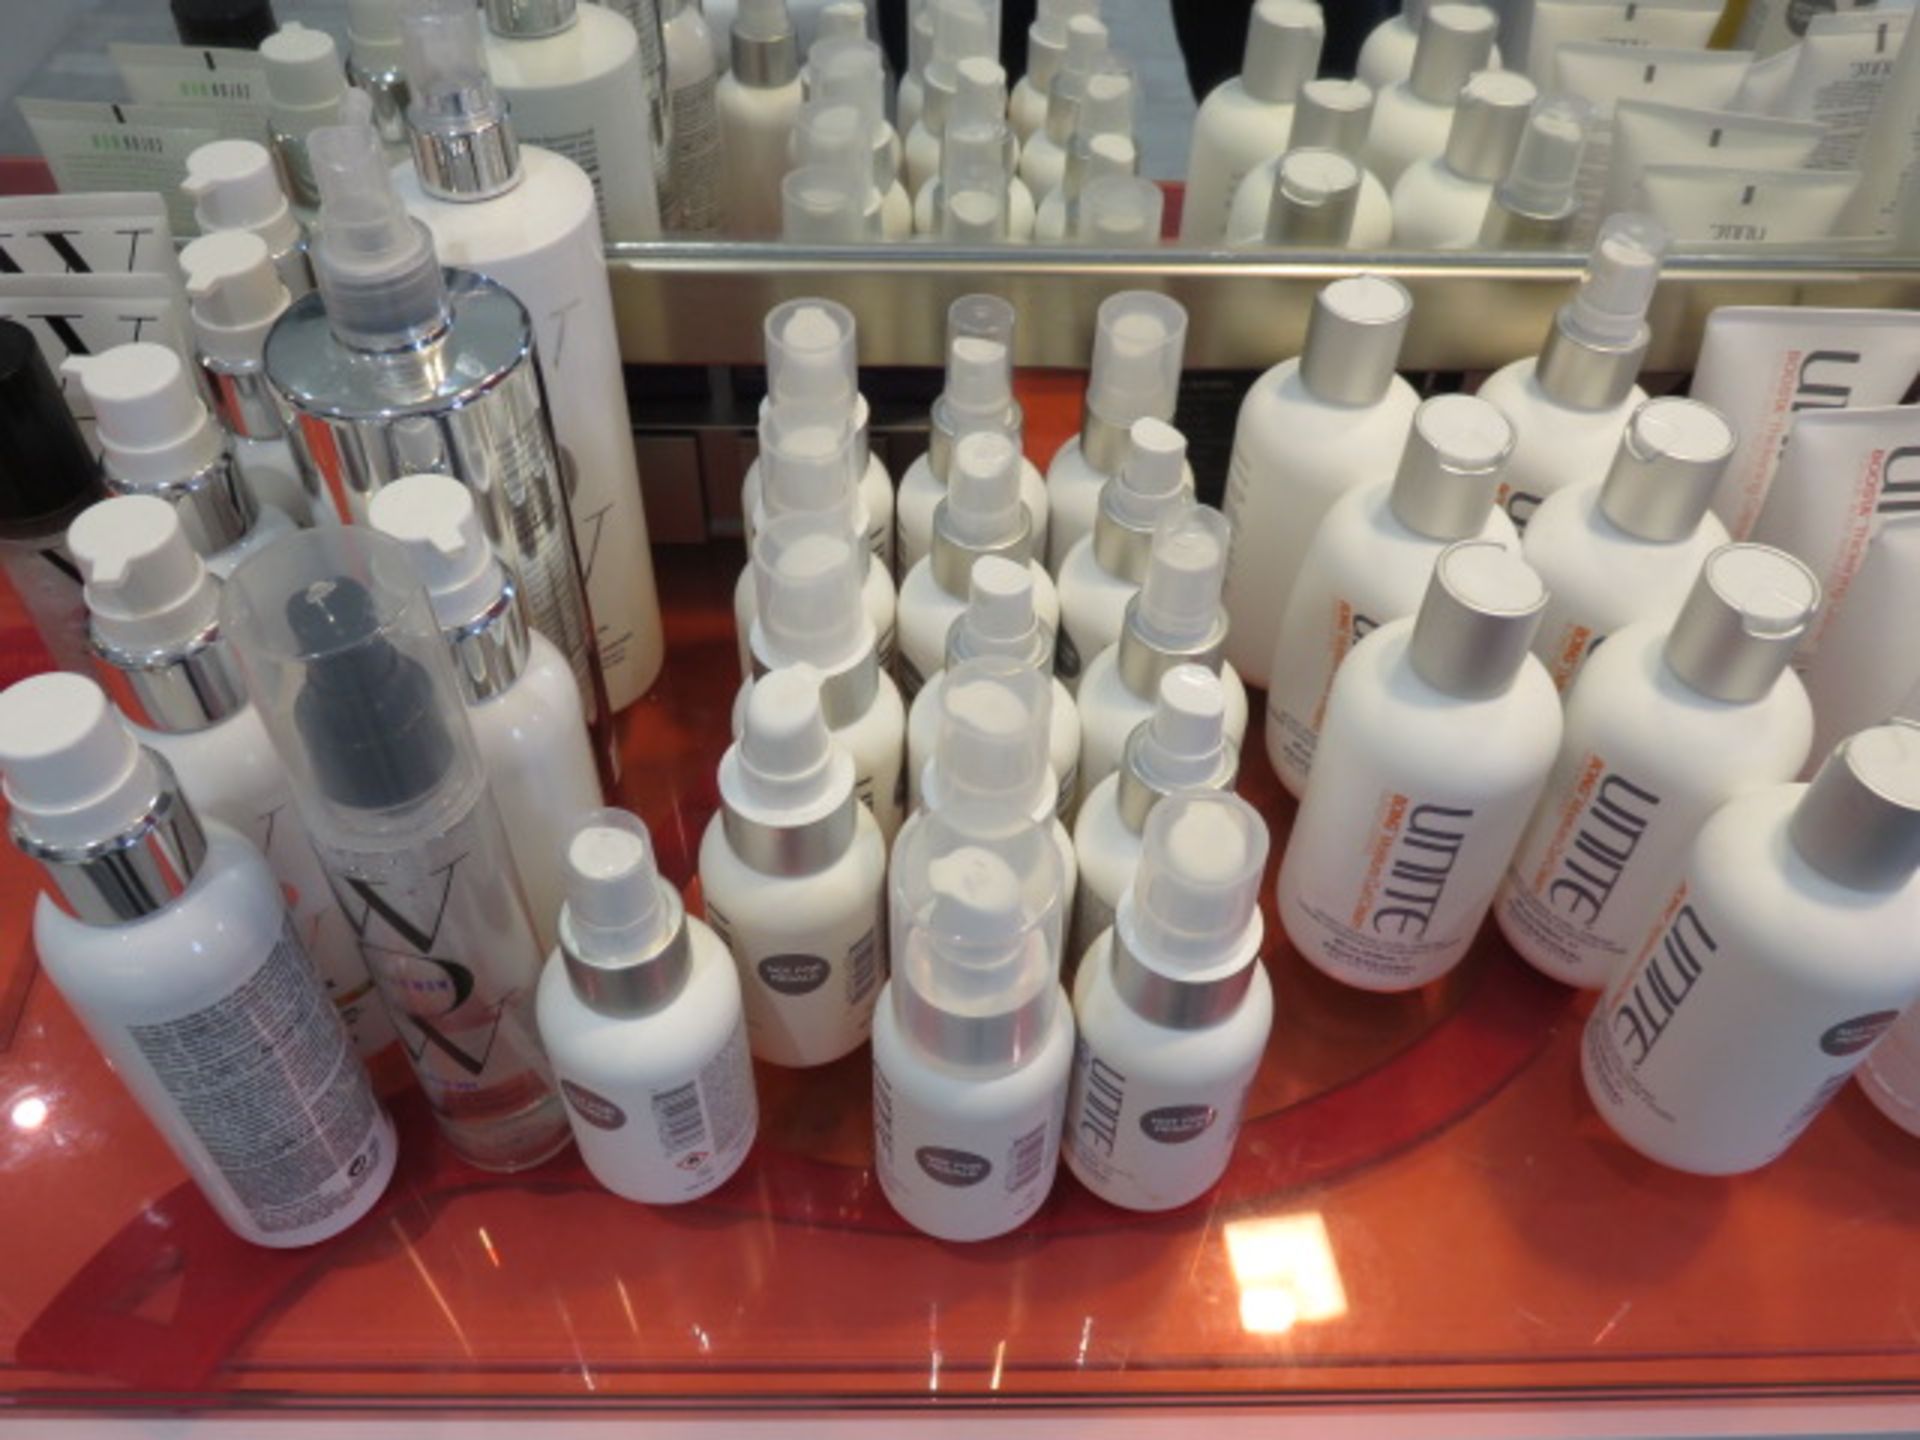 ASSORTED UNITE HAIR PRODUCTS, SPRAYS, CREAMS, OPEN BOTTLES - Image 2 of 4